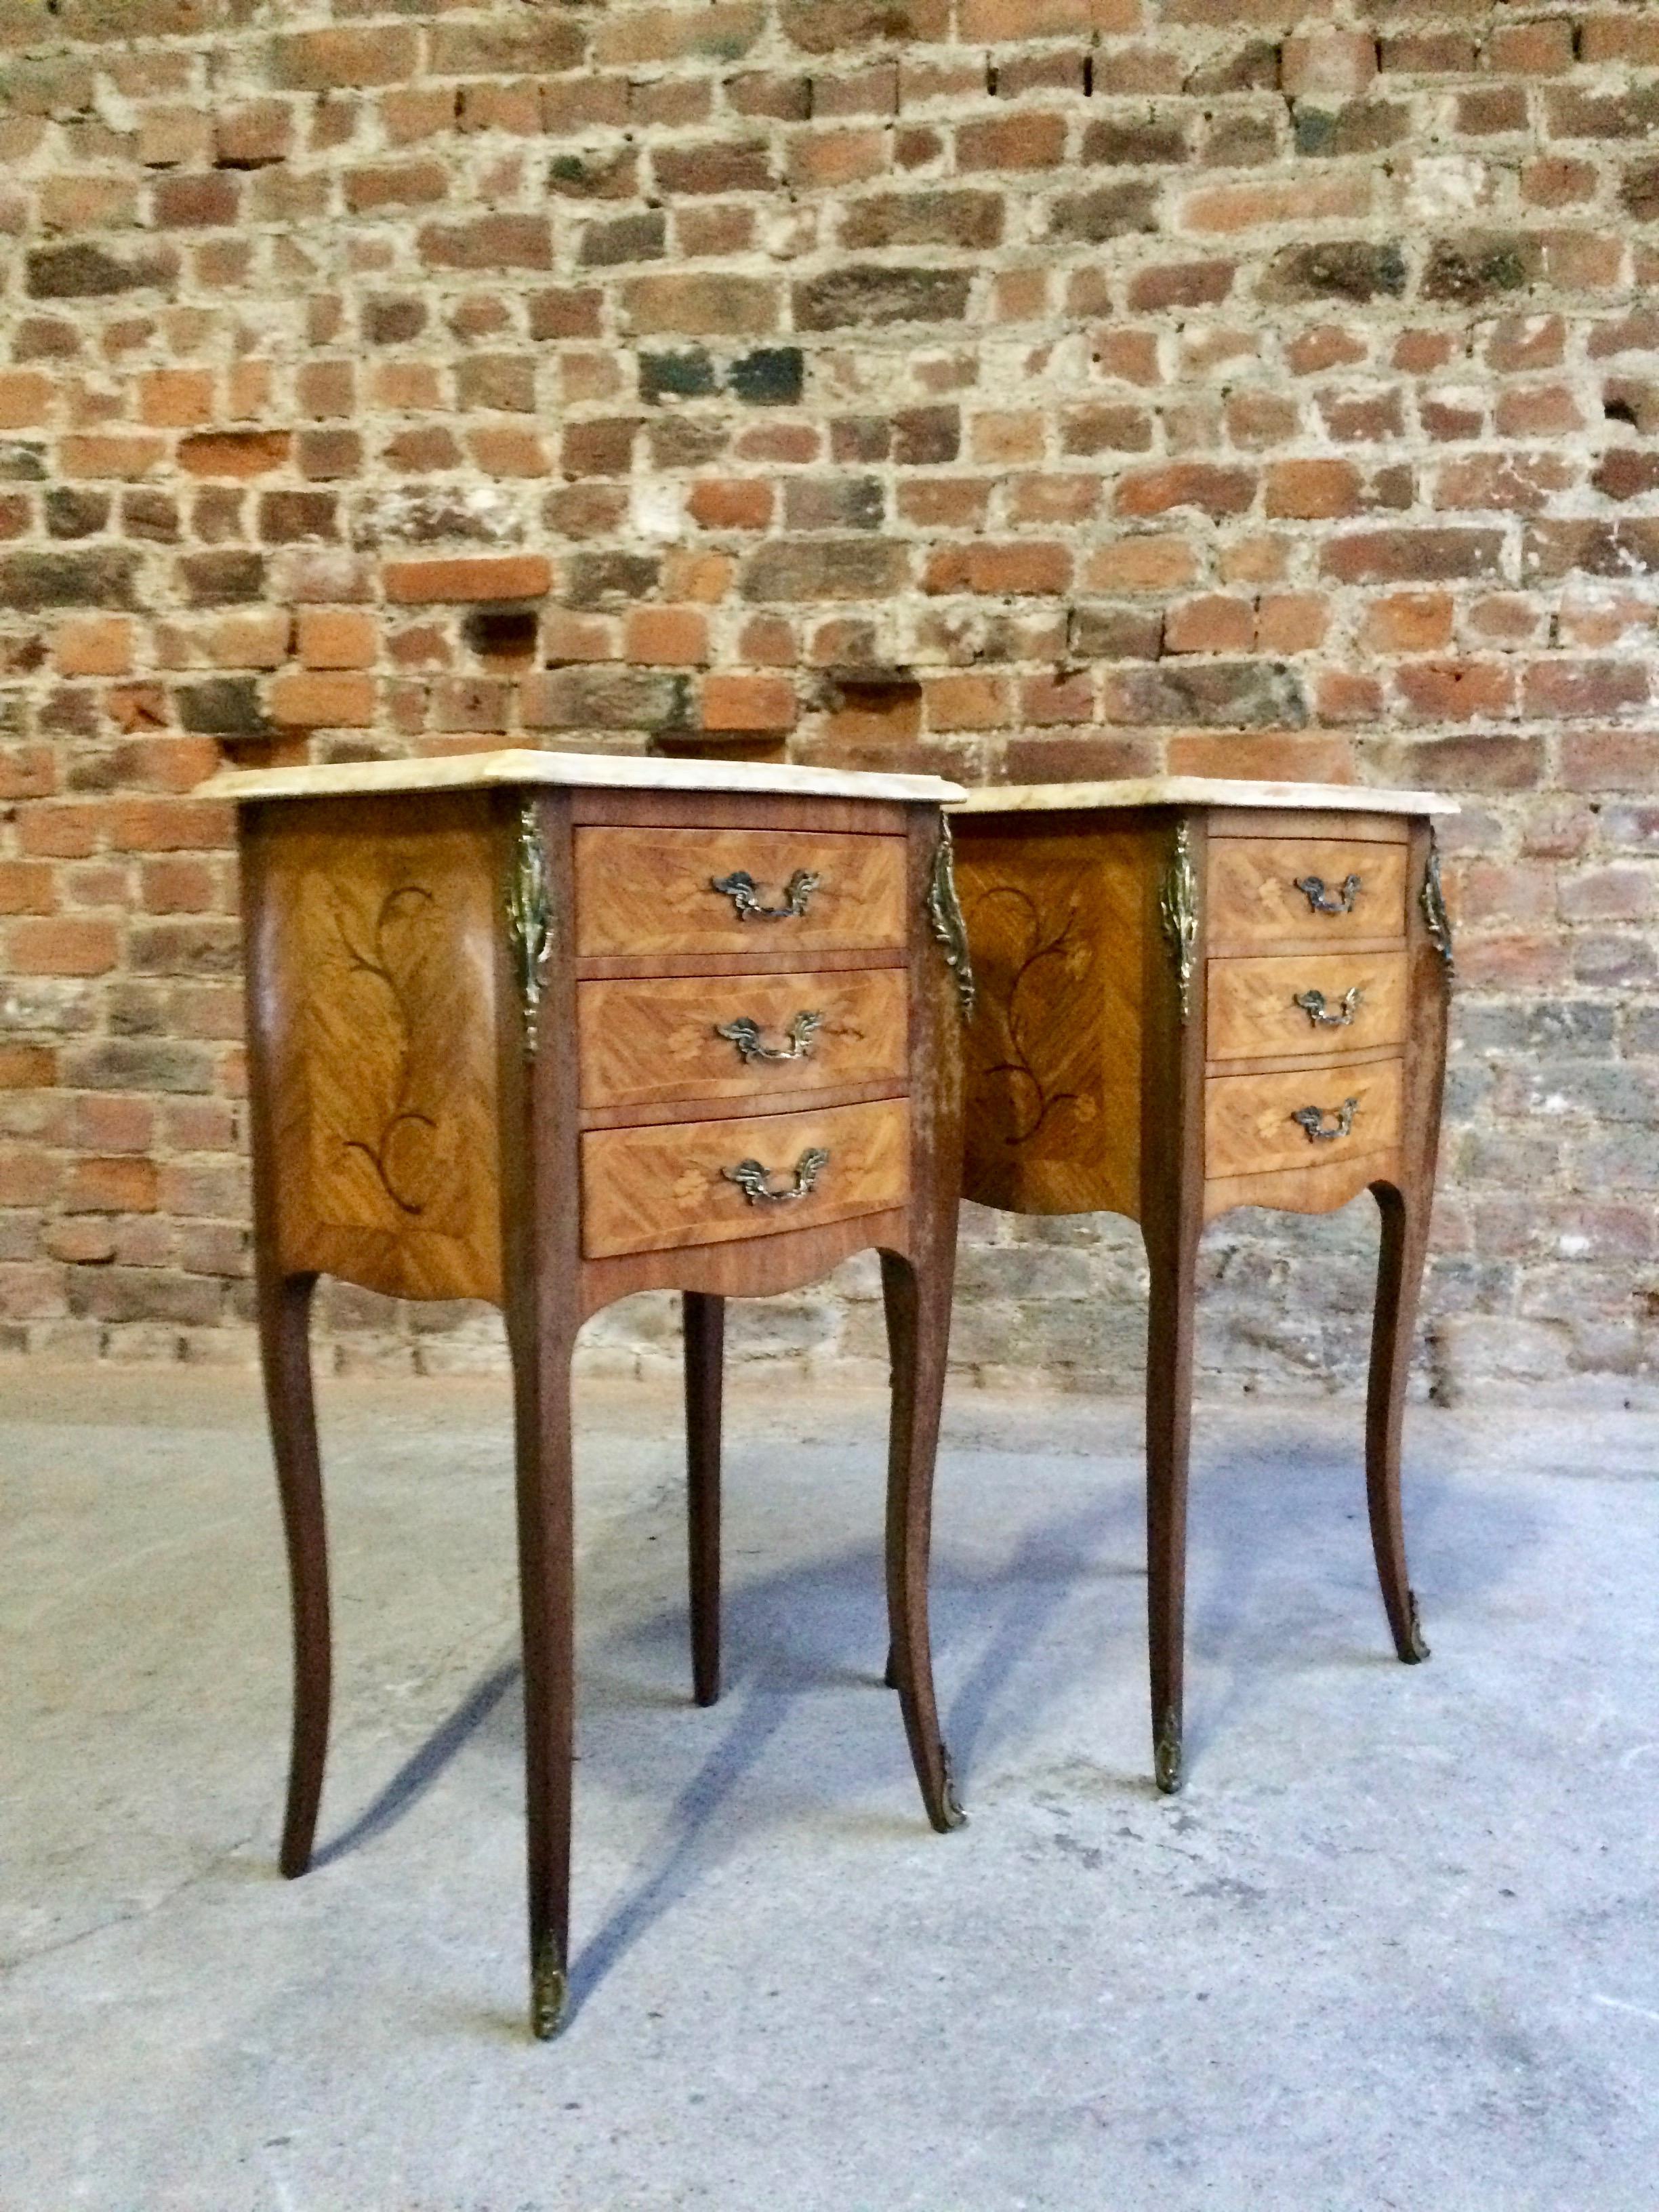 Antique French pair of Louis XV style marble topped Bombe Commode bedside cabinets dating to early 20th century, the scalloped cream marble tops over three drawers with dual bronze handles and gilt mounts, bronze accents to the sides and legs, all